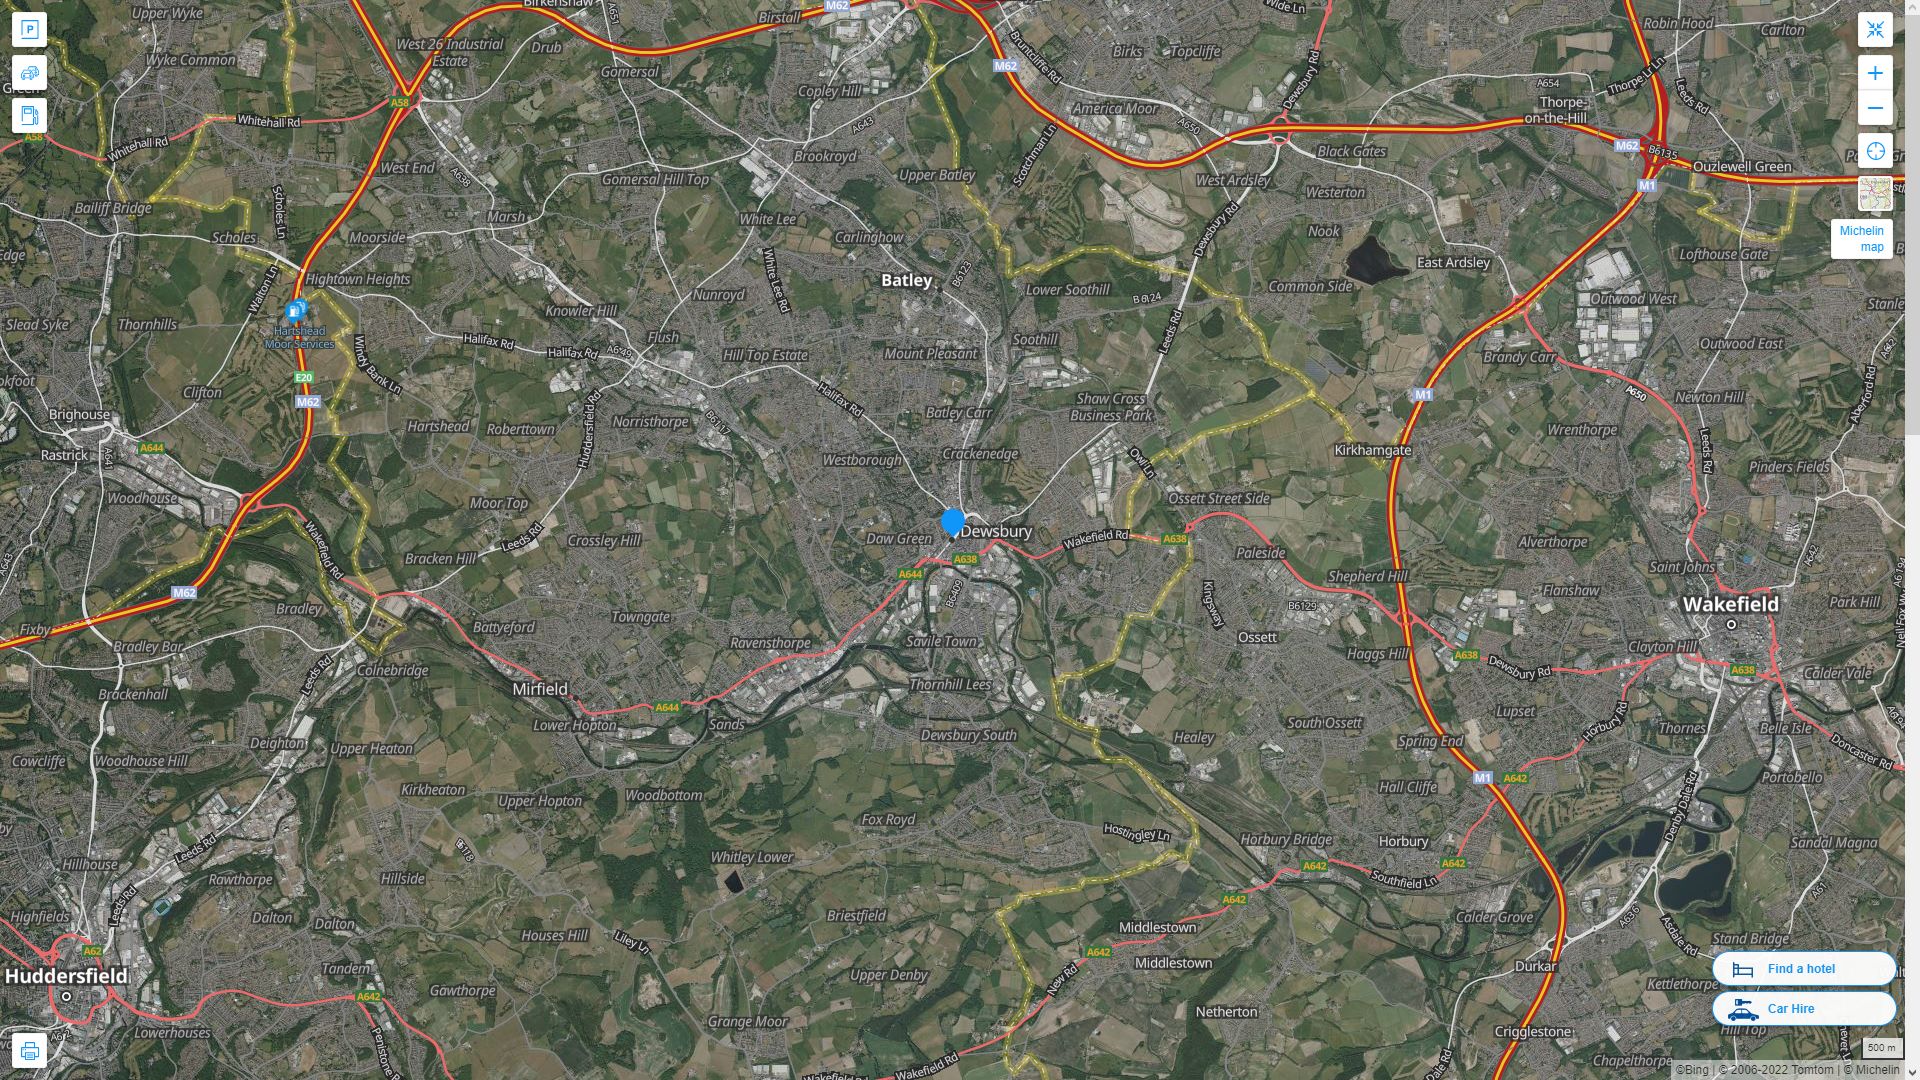 Dewsbury Highway and Road Map with Satellite View